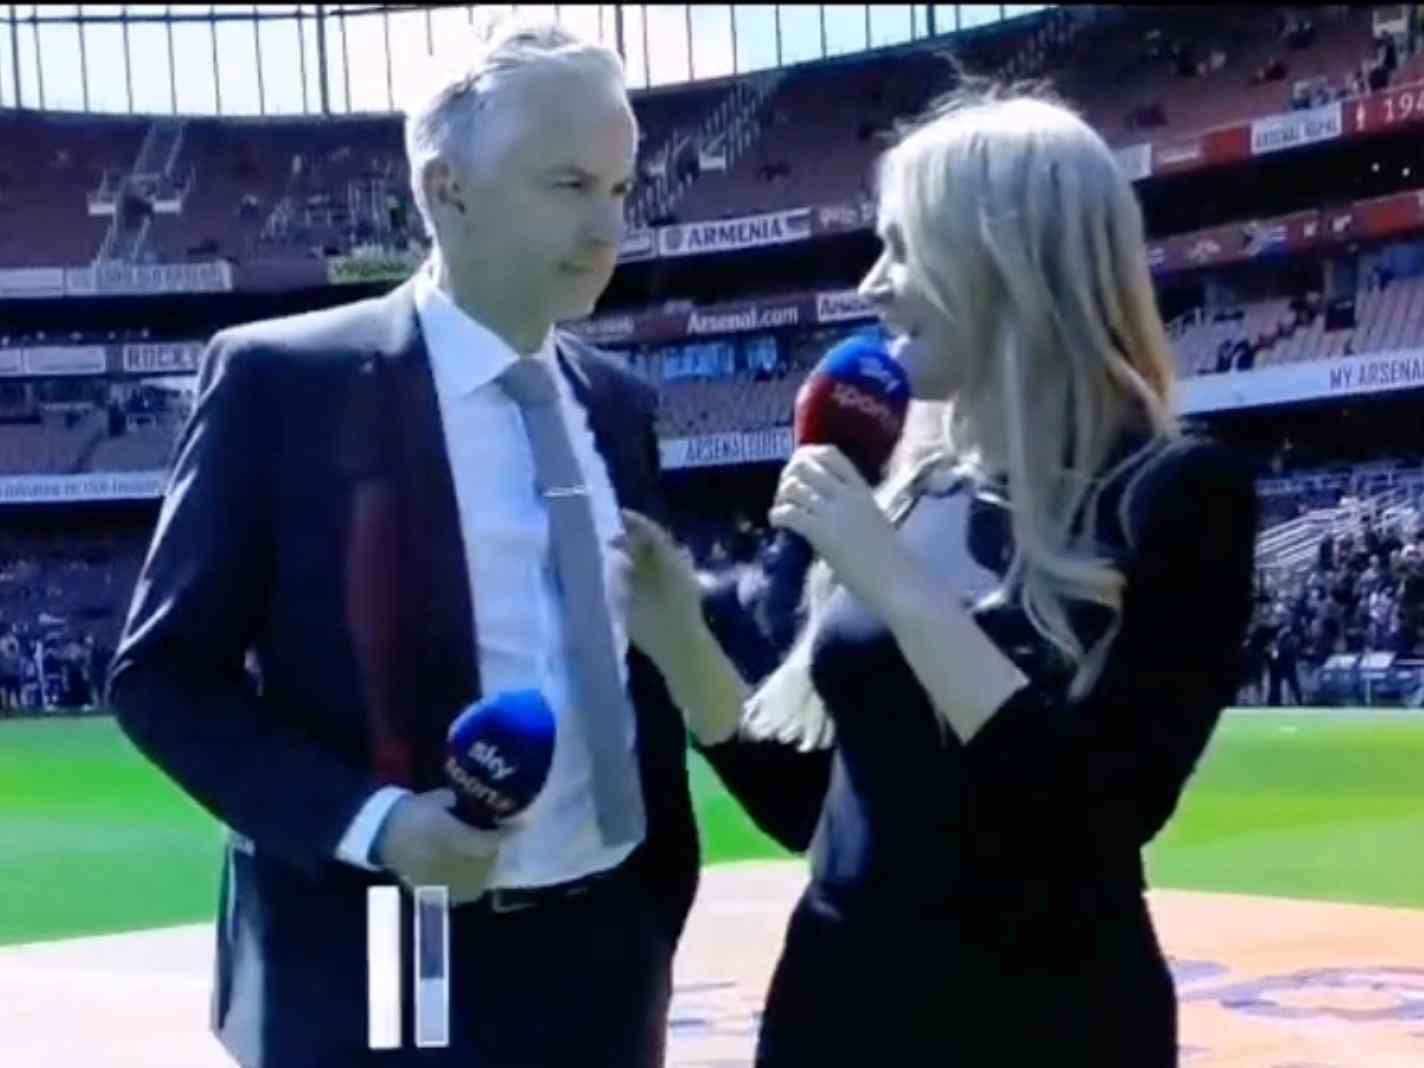 The photo shows Sky Sports presenters Alan Smith and Laura Woods.